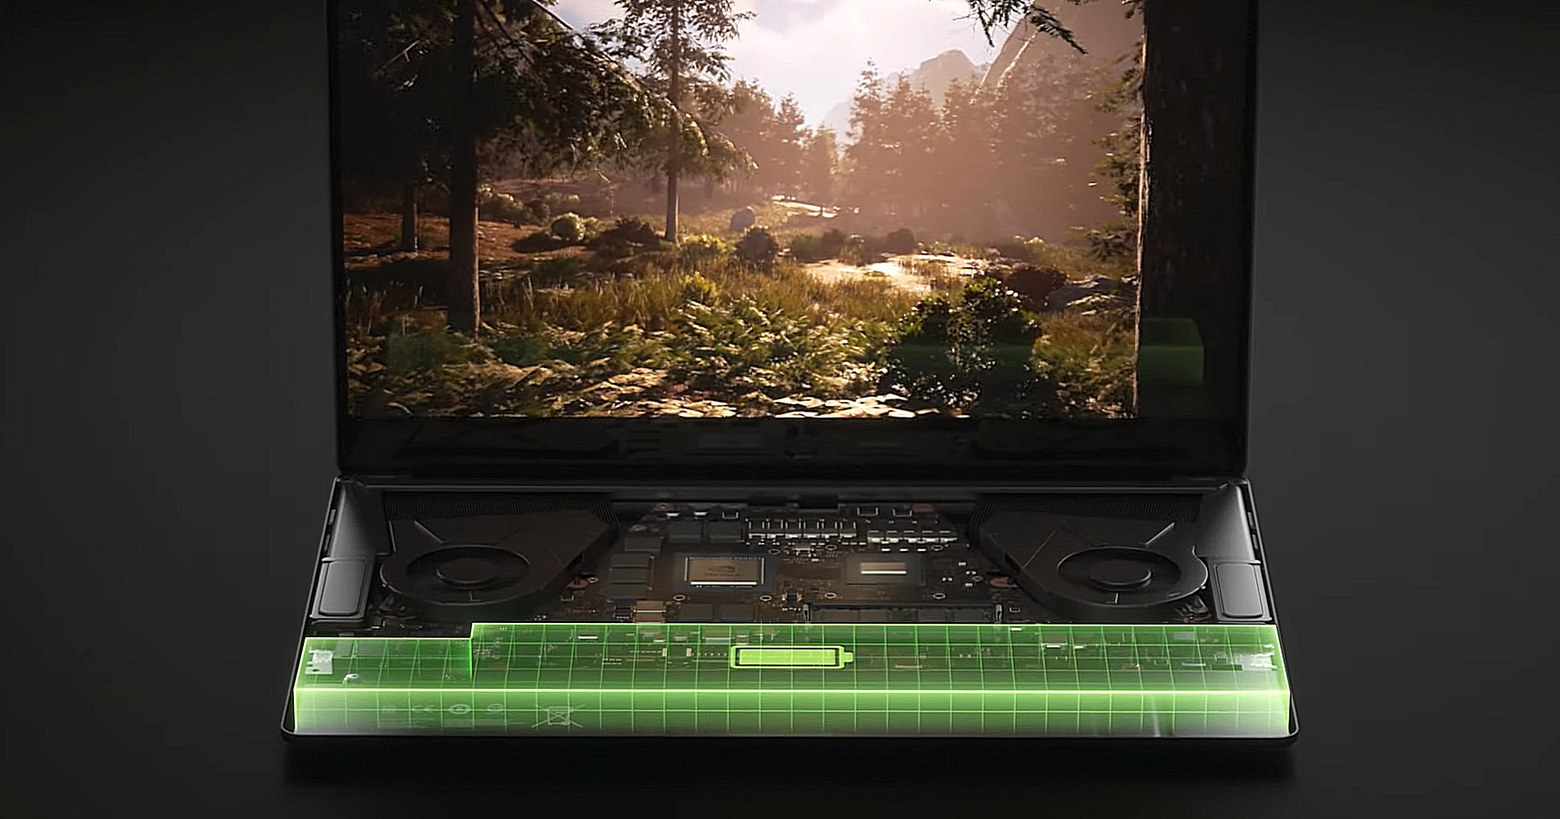 This screenshot shows an RTX 40 series laptop running one of NVIDIA's latest Geforce GPUs. The laptop is shown in the center of the picture and a game clip can be seen where the player is in a breathtaking forest landscape. The background is kept simple in a grayish tone. This is a 3D visualization where the keyboard has been deliberately omitted so that we can look inside the laptop. The bottom edge of the laptop is highlighted with a typical Nvidia green grid.